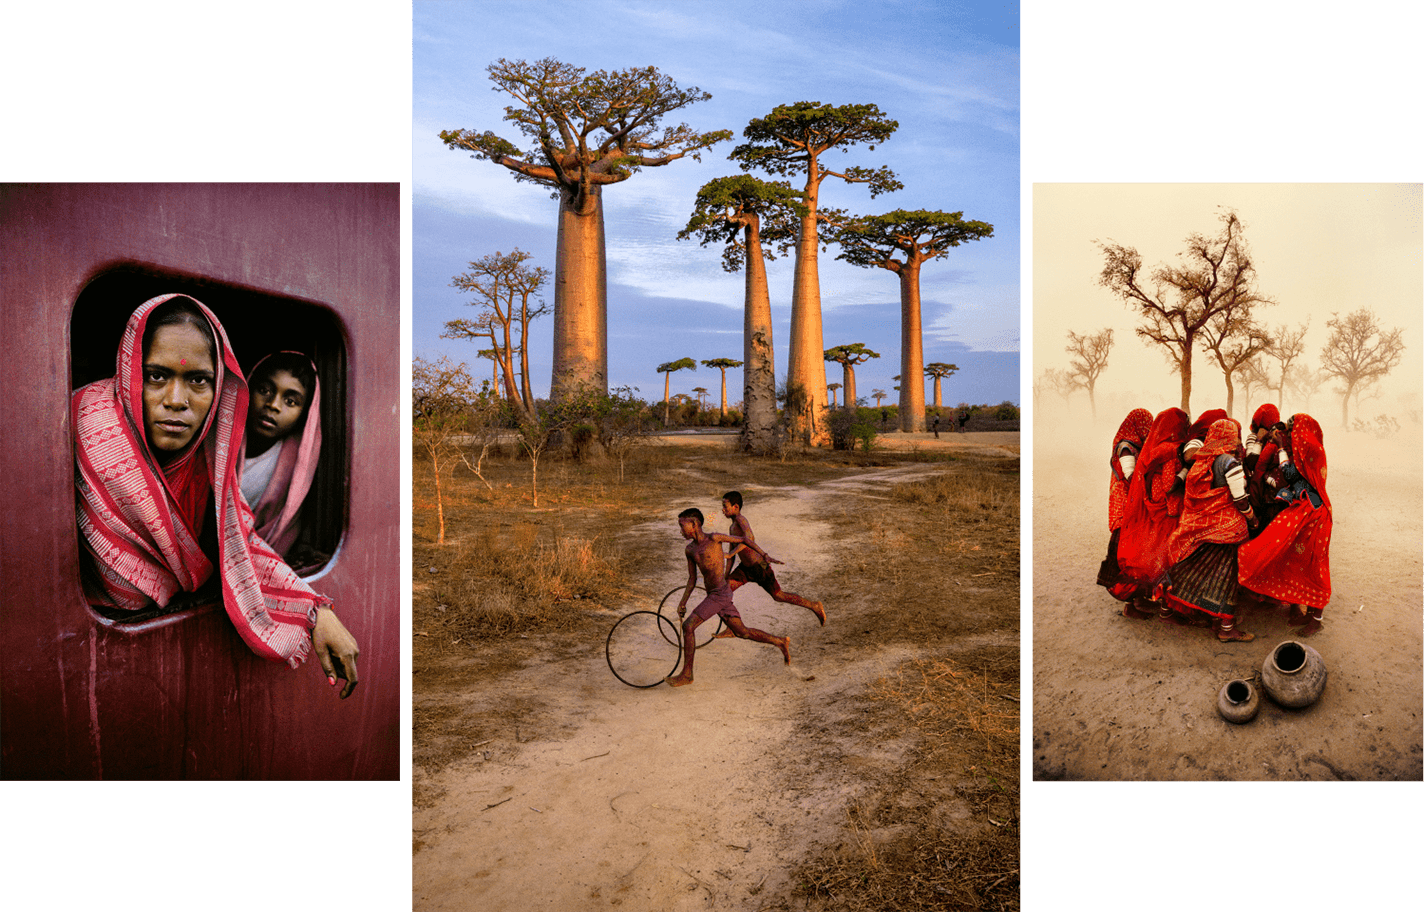 An Extraordinary Photography Exhibition - Steve McCurry ICONS in Sydney: A Photography Exhibit